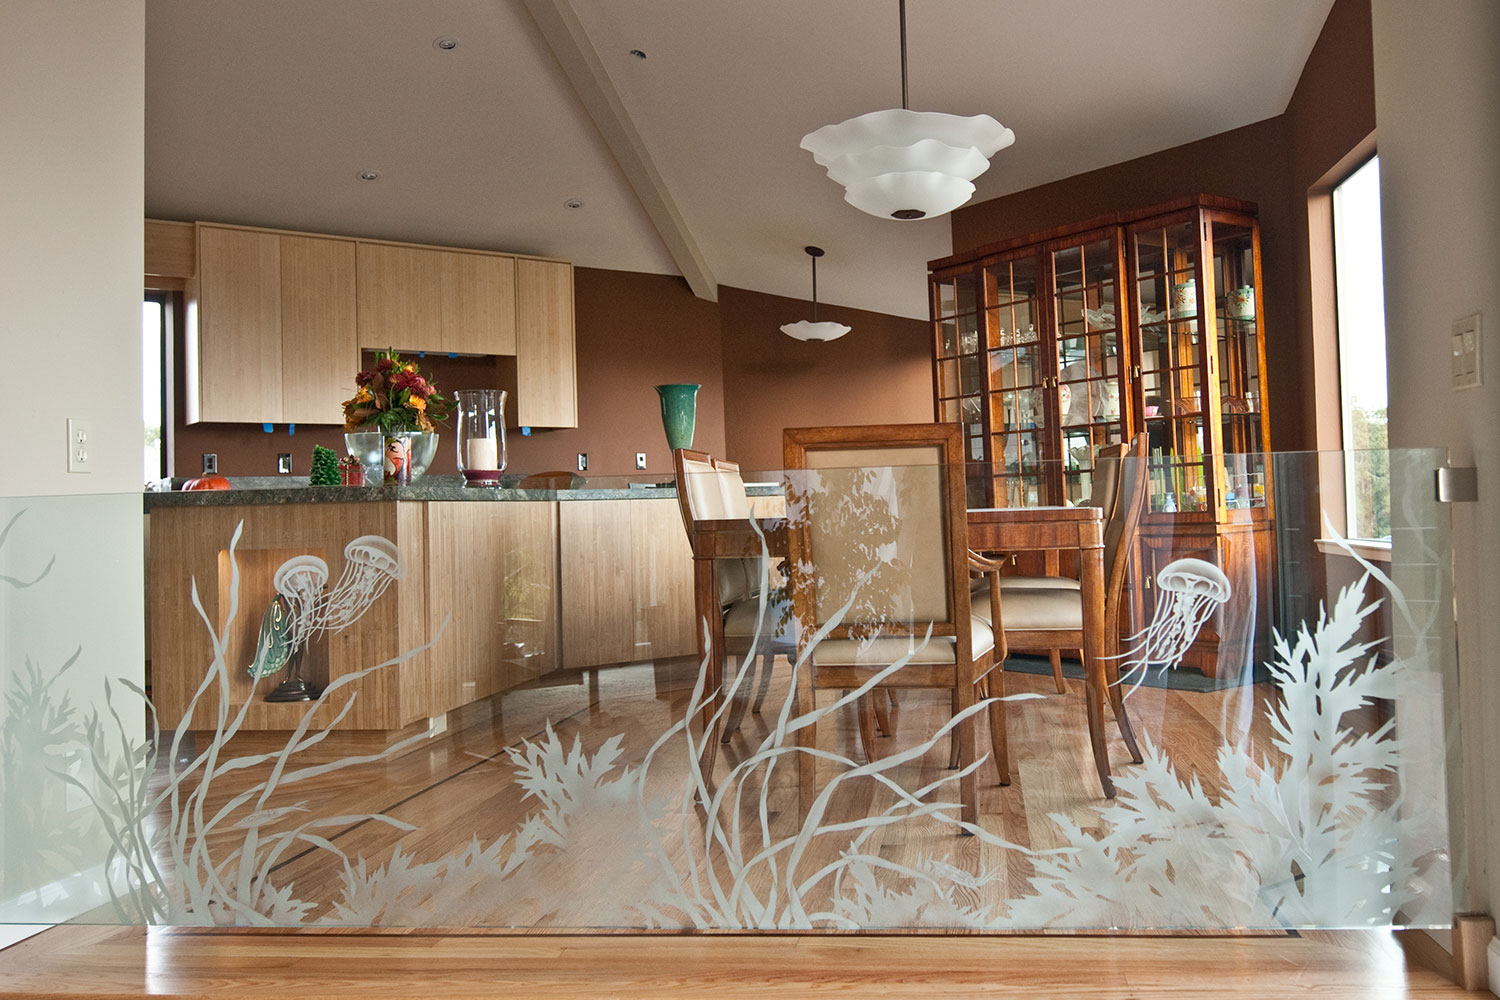 Etched glass railing designs, glass decorative partitions wall